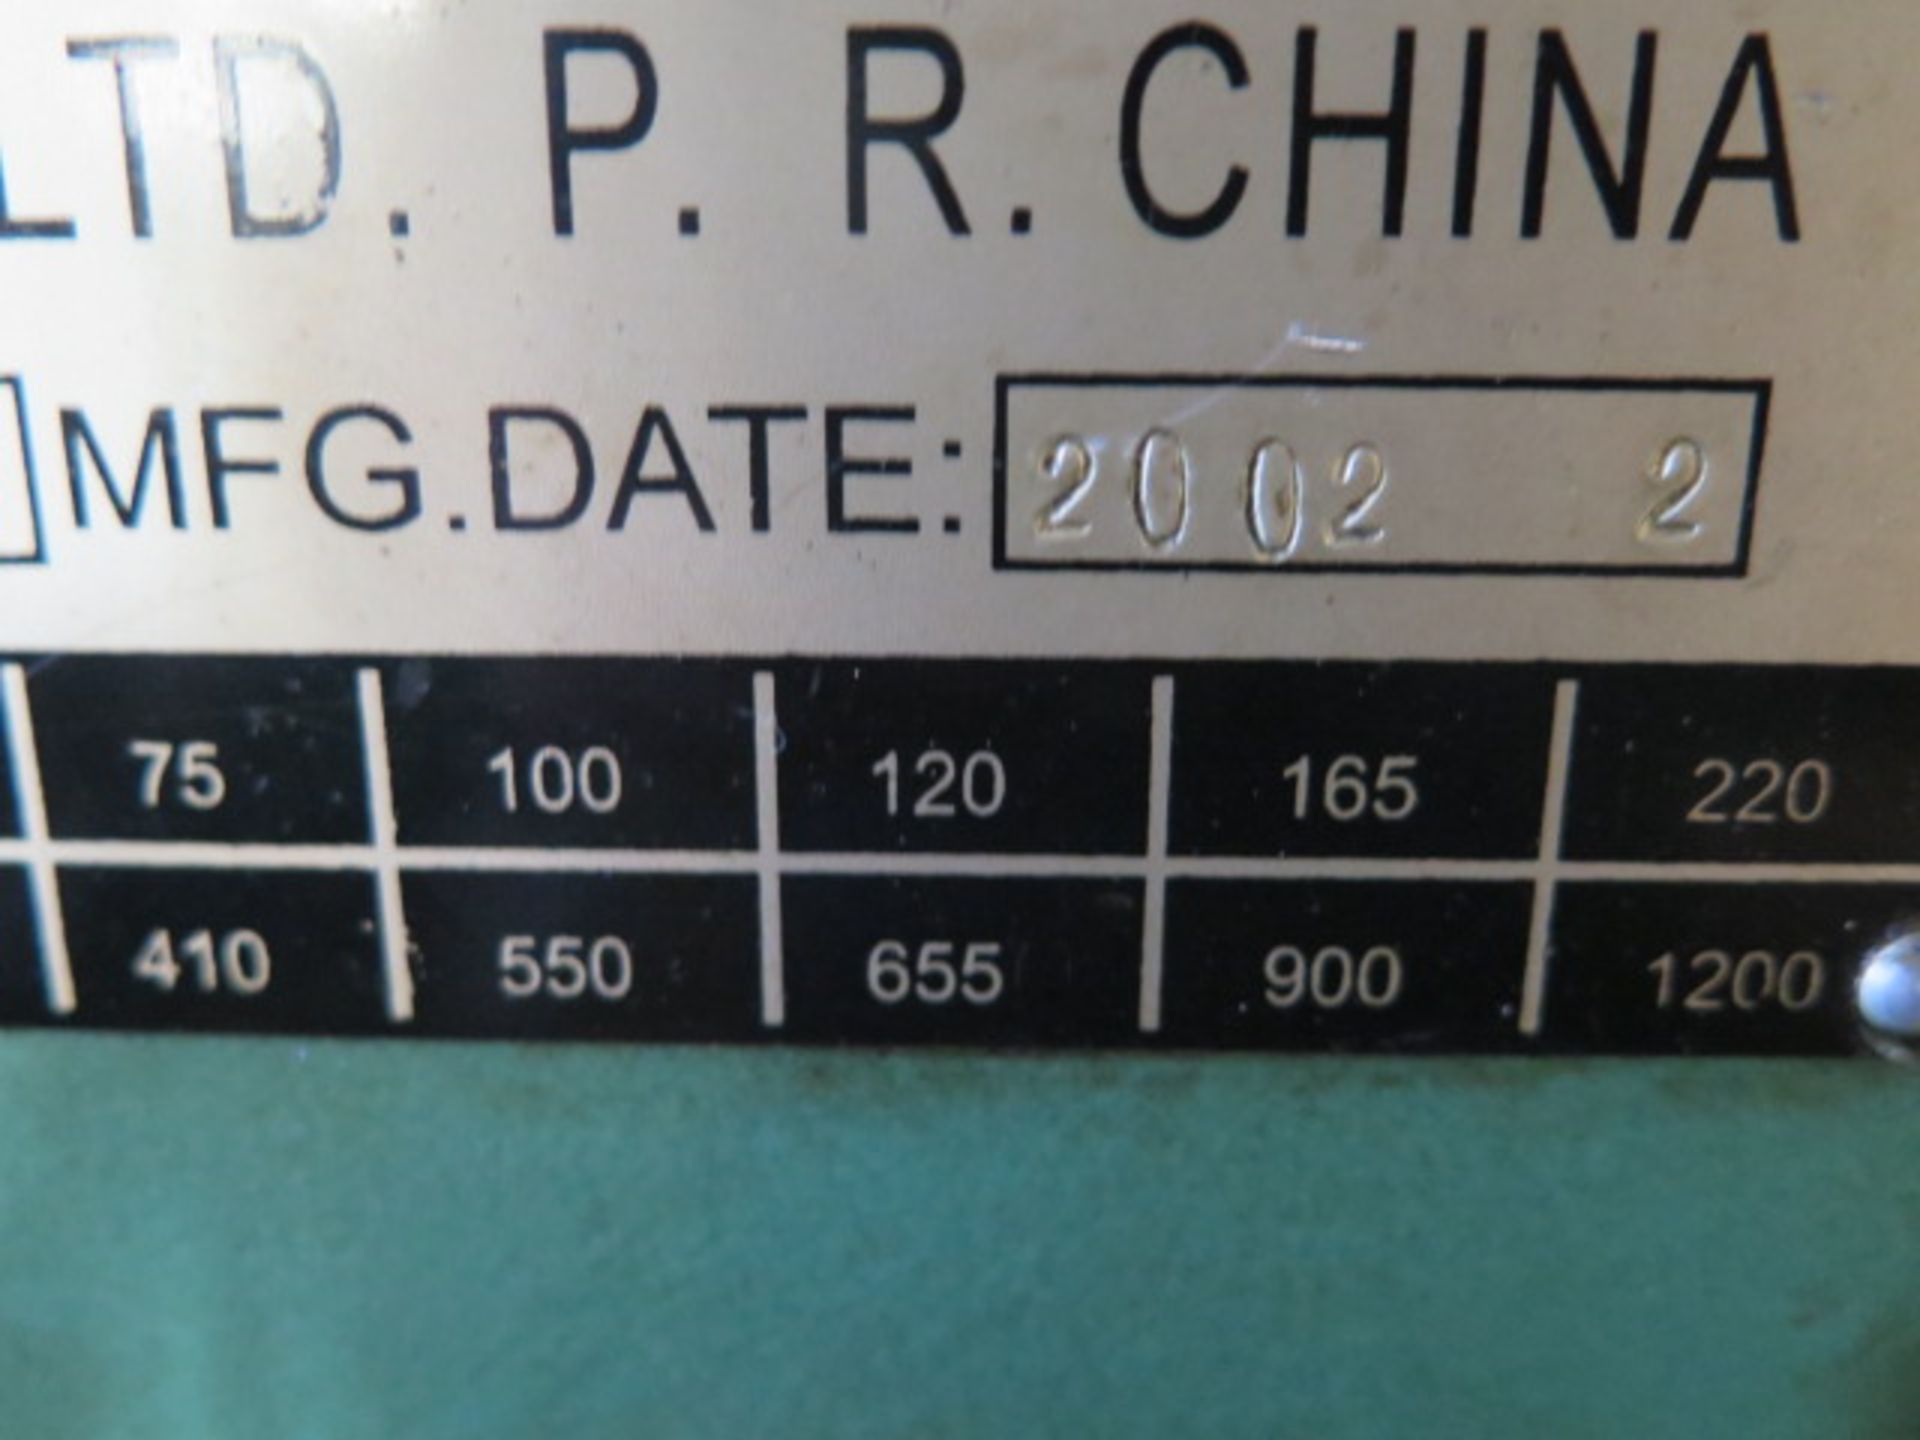 Chizhou mdl. CZ300 11 ½” x 24” Lathe s/n 0101 w/ 50-1200 RPM, Inch/mm Thread, Tailstock, SOLD AS IS - Image 12 of 12